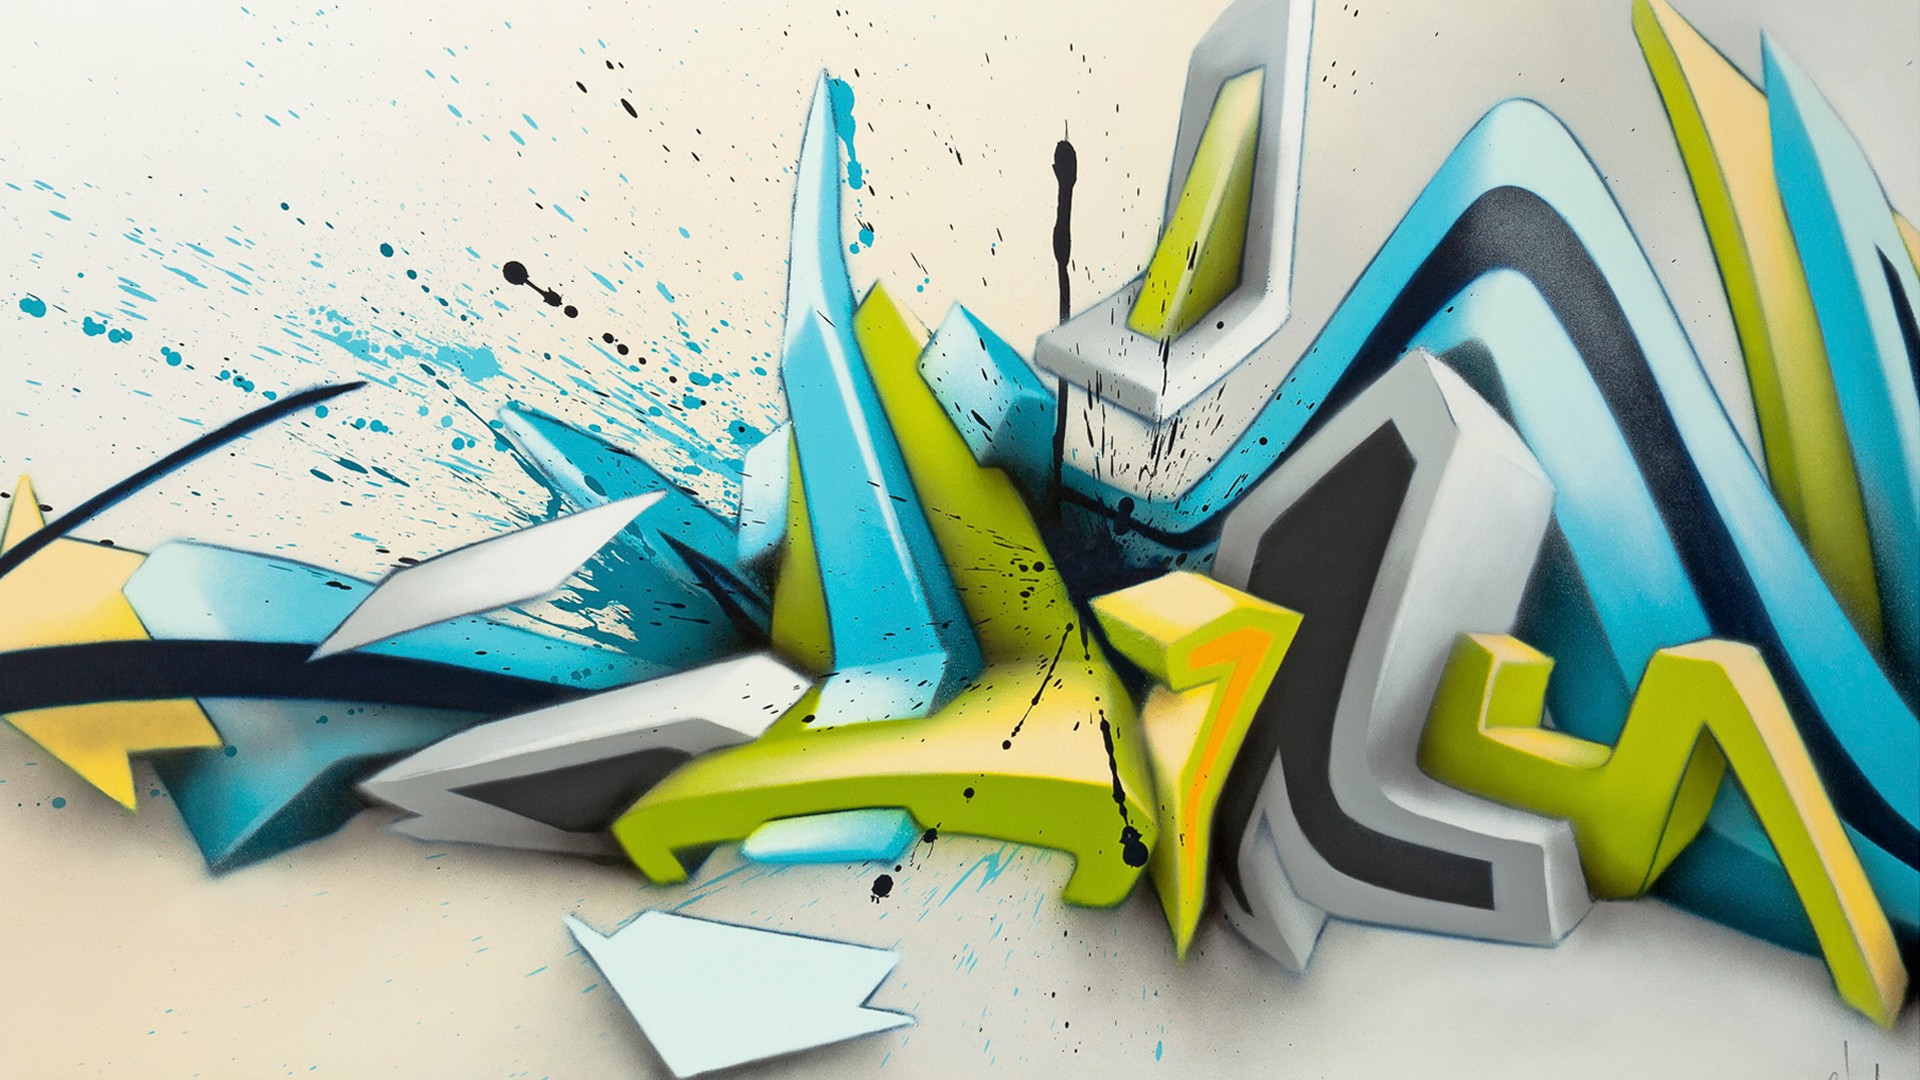 Daim, Graffiti, 3D, Abstract Wallpapers HD / Desktop and Mobile Backgrounds